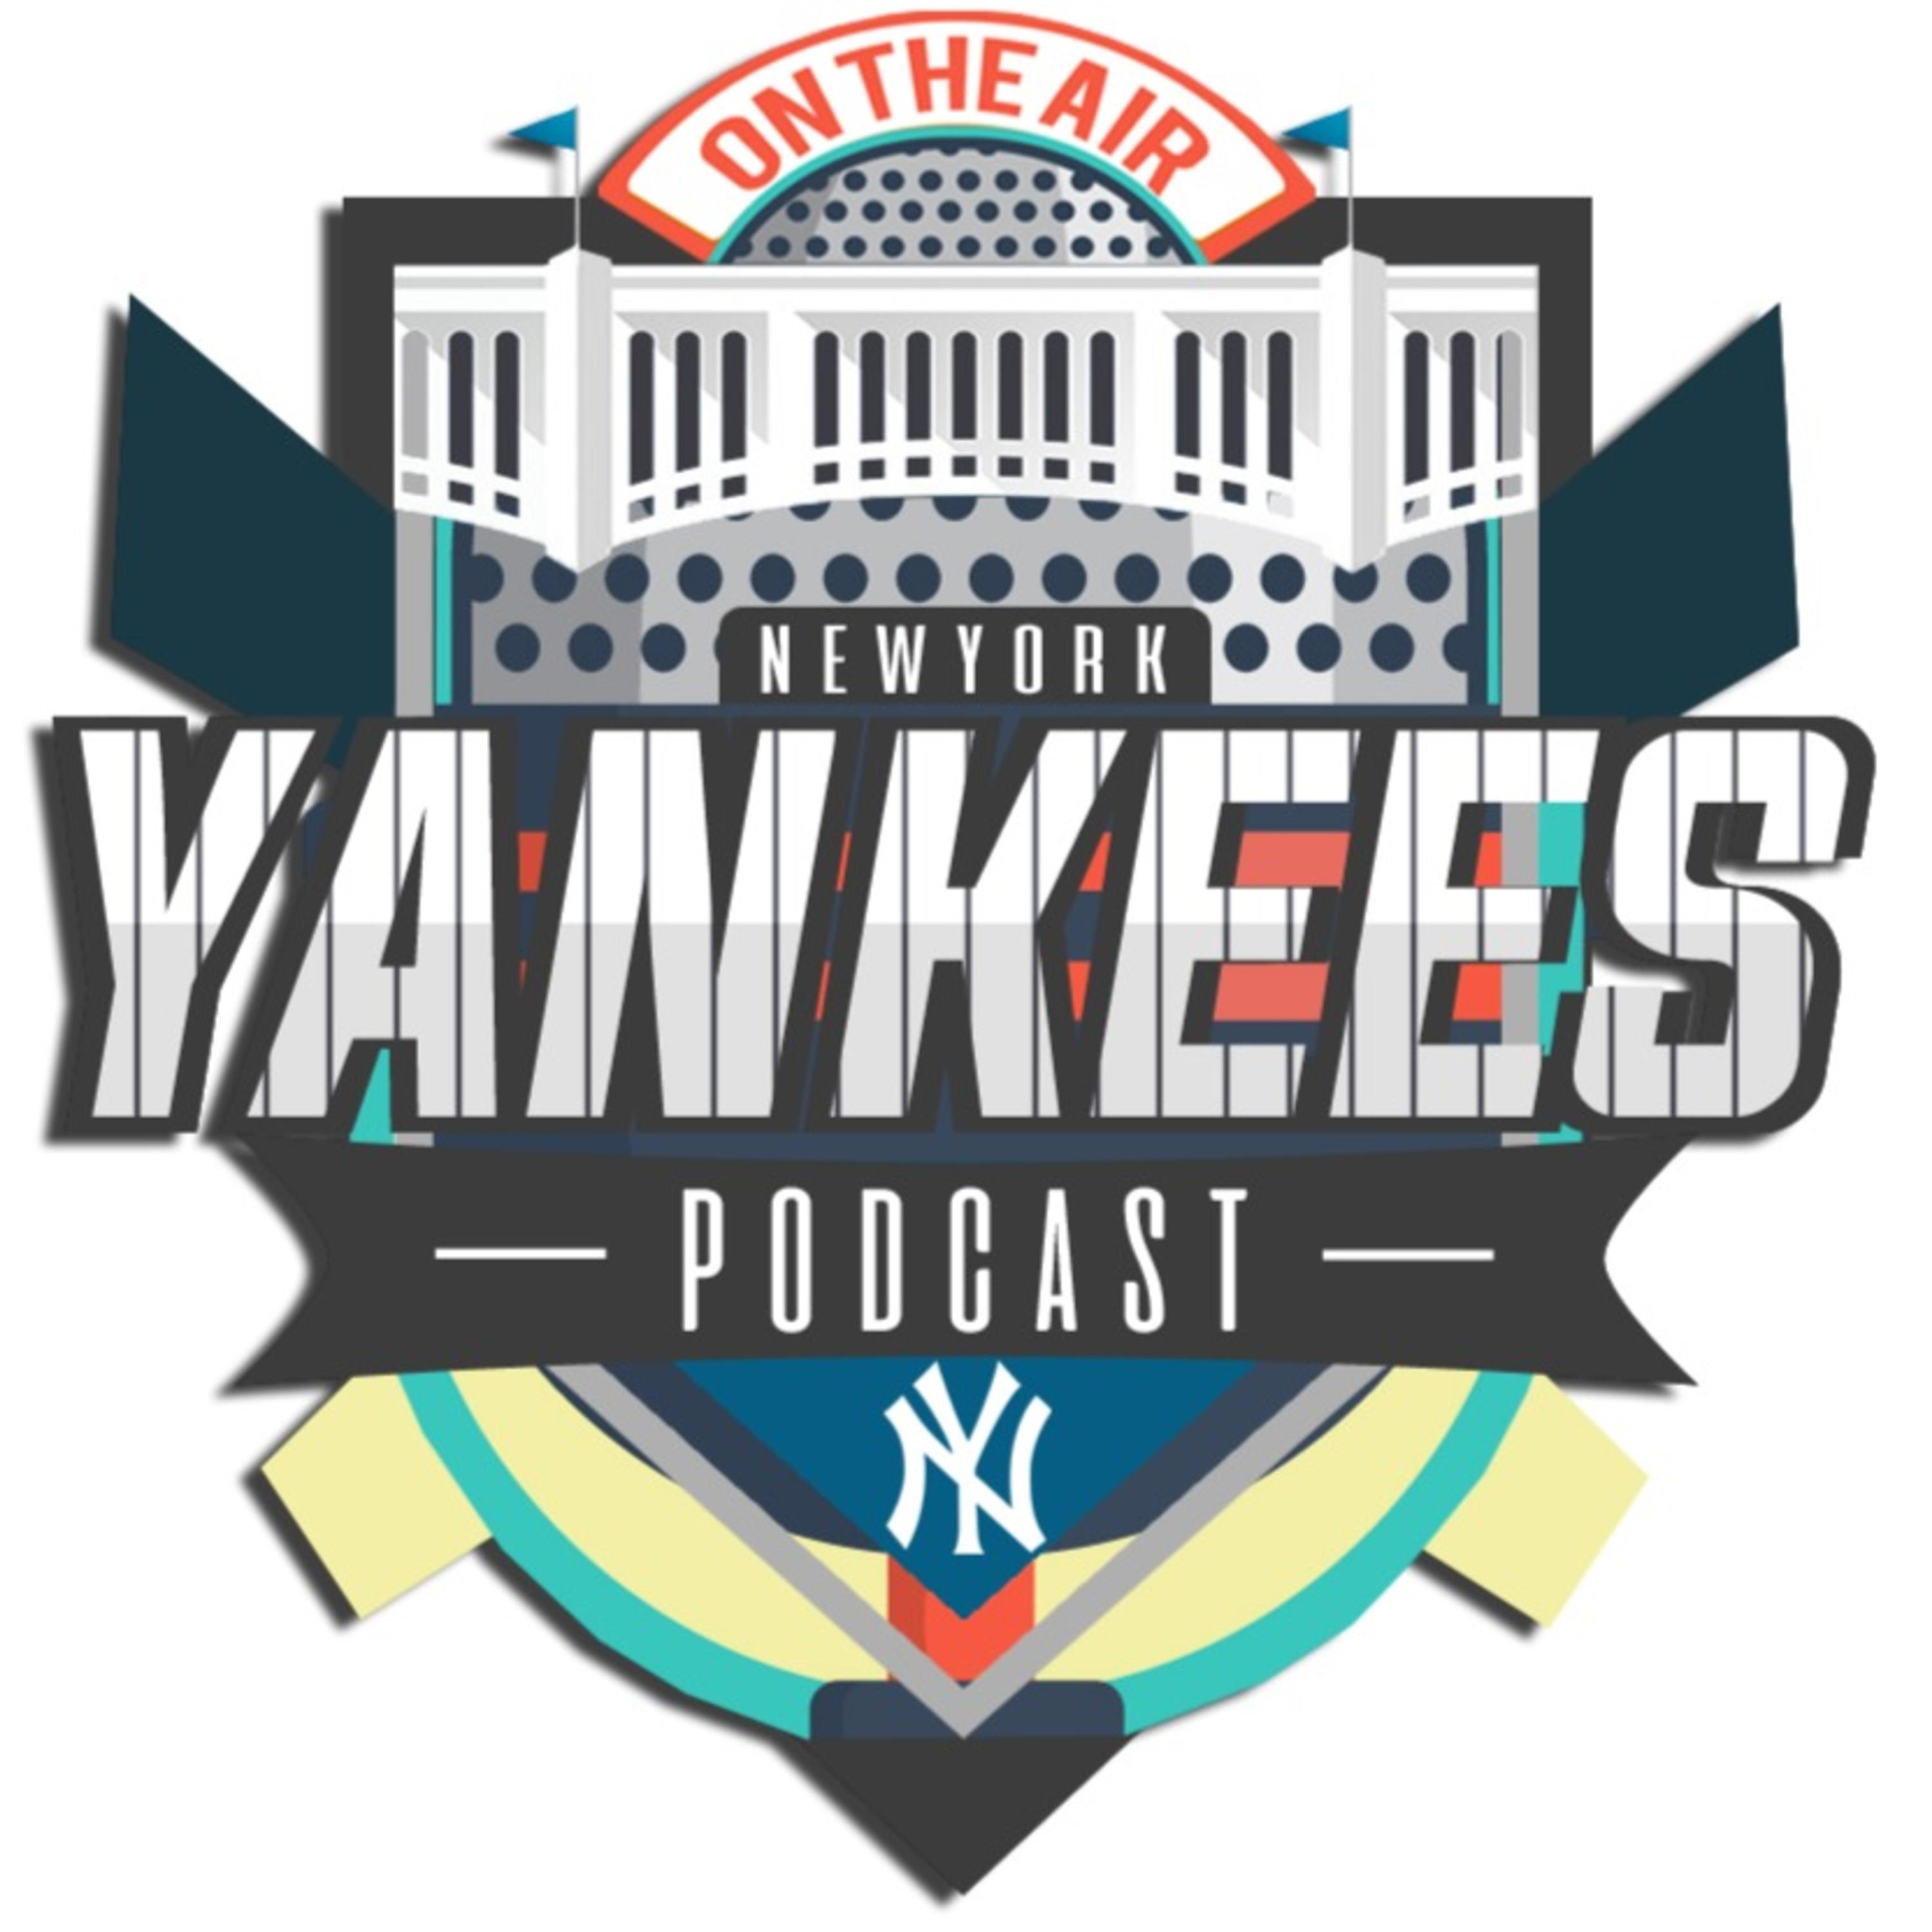 New York Yankees Hungary Podcast - Bé x DS! x Mike - S02EP15